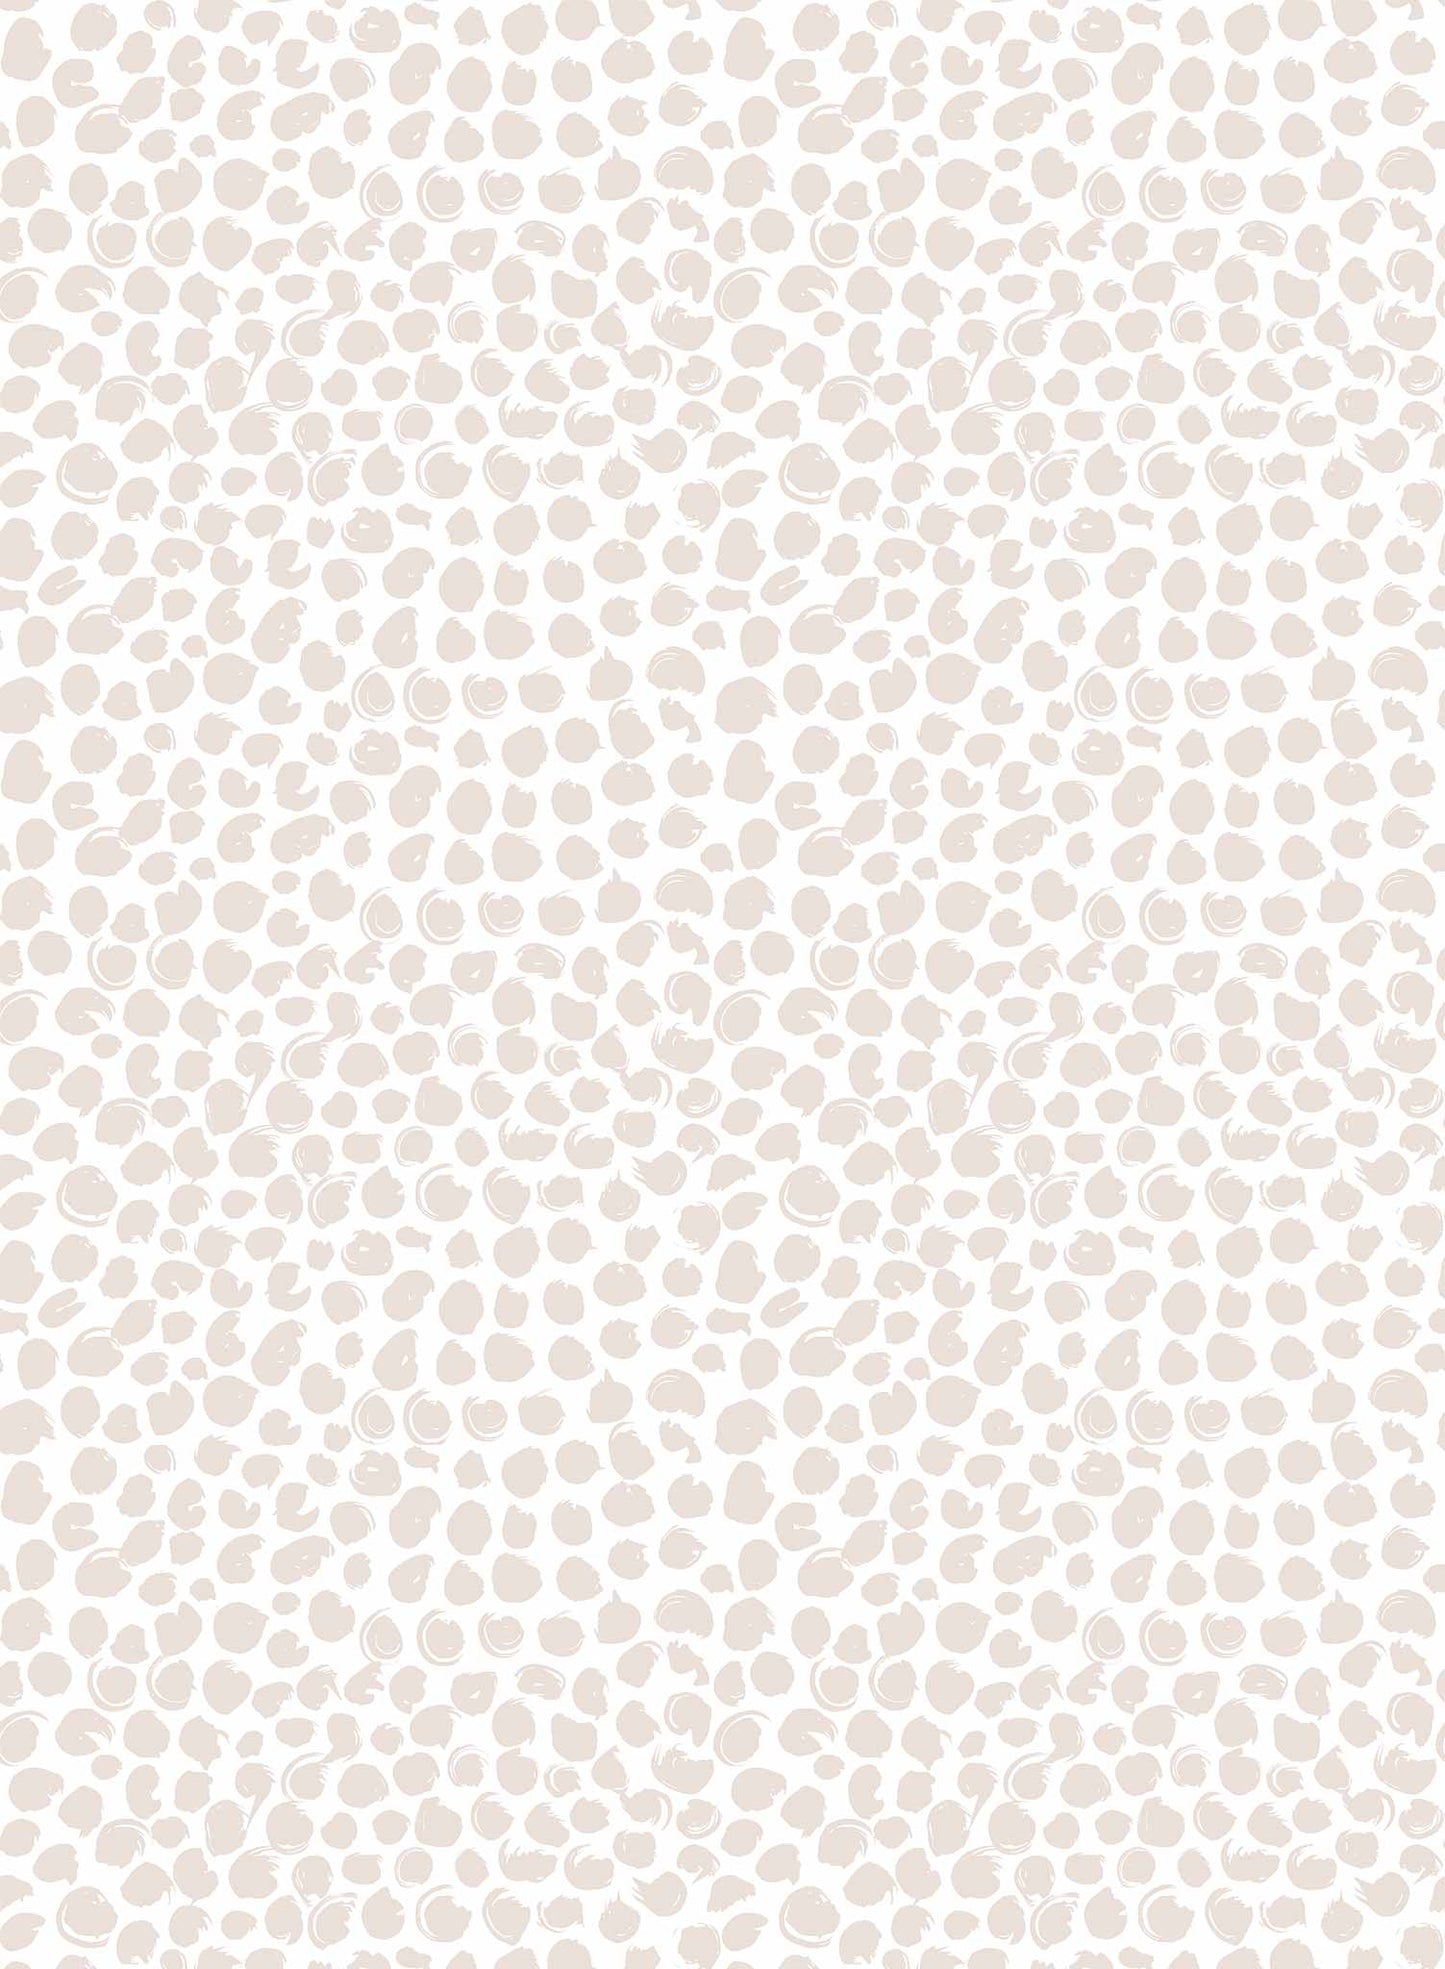 On the Dot is a minimalist wallpaper by Opposite Wall of imperfect dots of different sizes and looks.